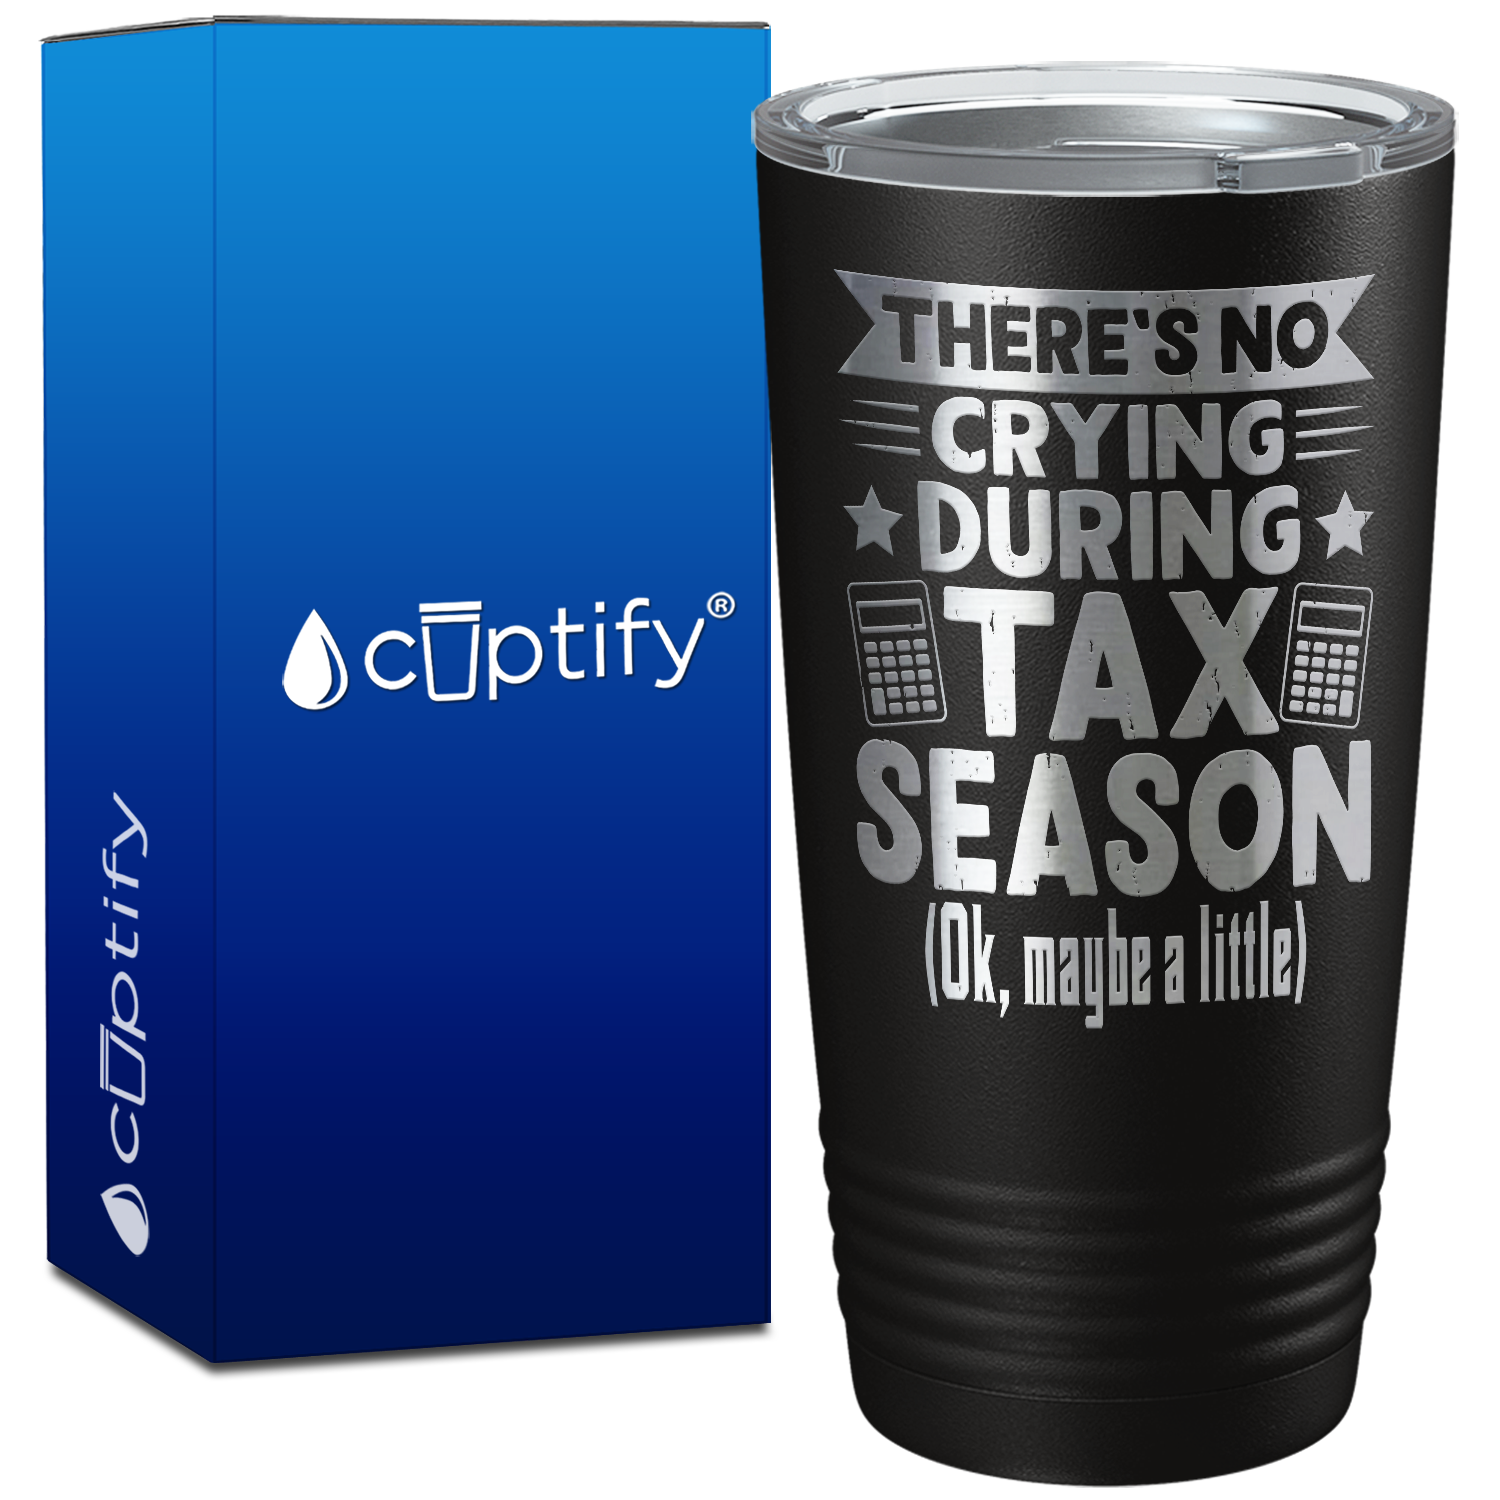 There's No Crying During Tax Season on 20oz Tumbler